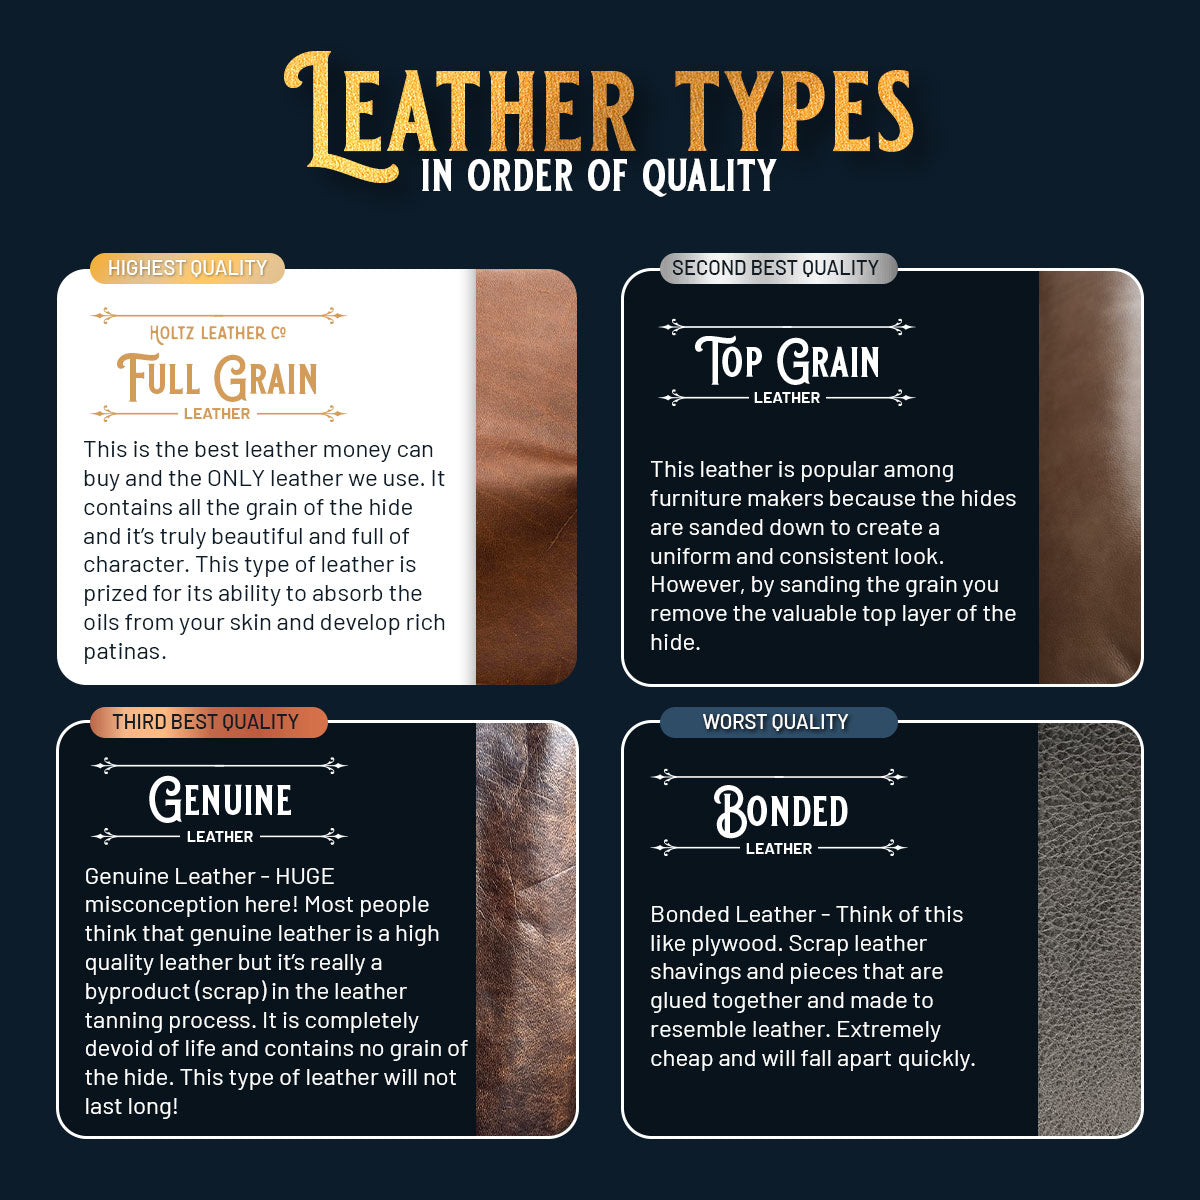 Caring for Your Leather Bag: FAQ – MAHI Leather